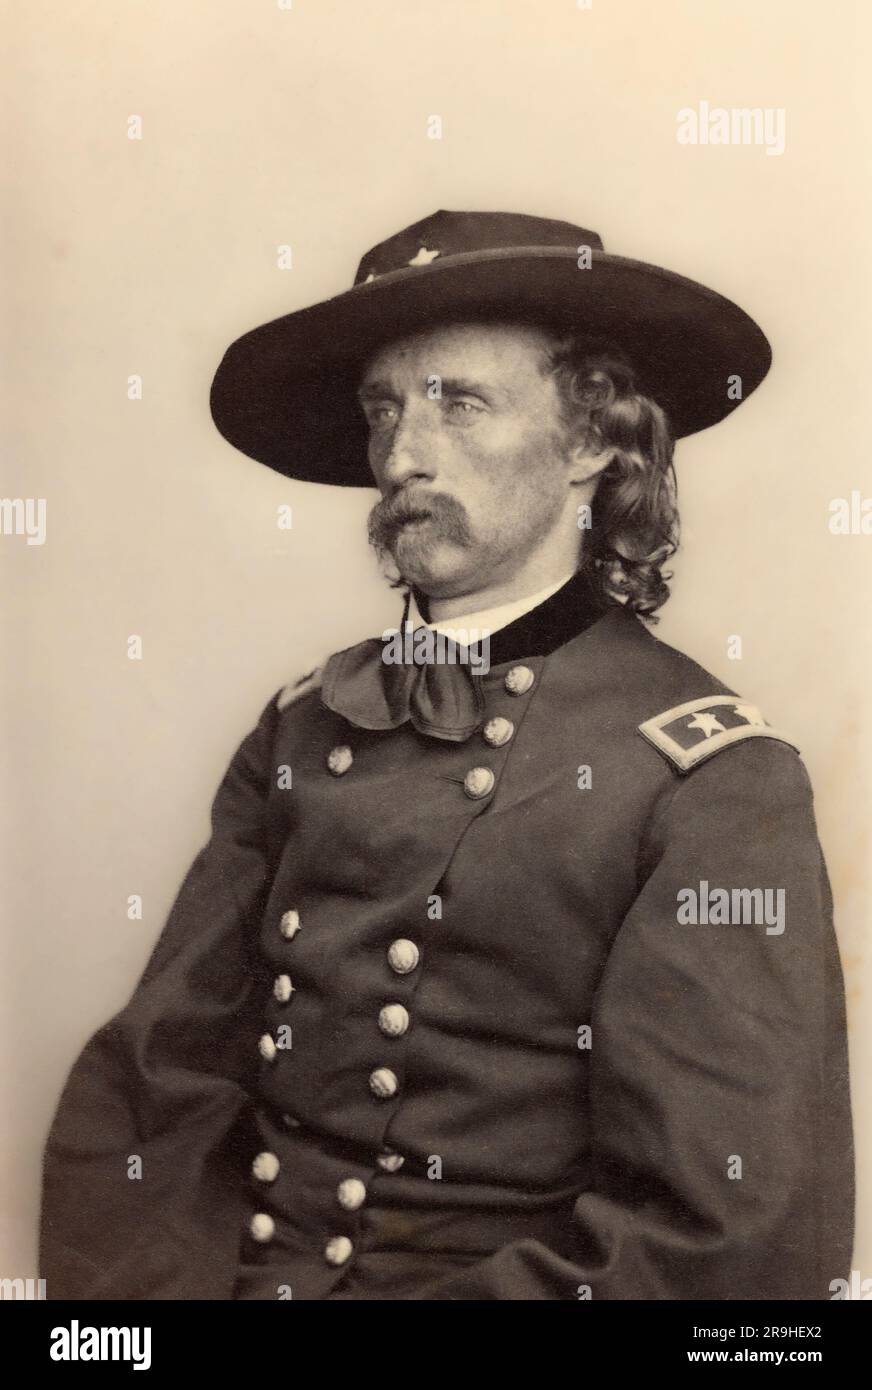 George Armstrong Custer, 1839 – 1876.  United States Army officer and cavalry commander in the American Civil War and the American Indian Wars who was killed along with most of his command at the Battle of the Little Bighorn. Stock Photo